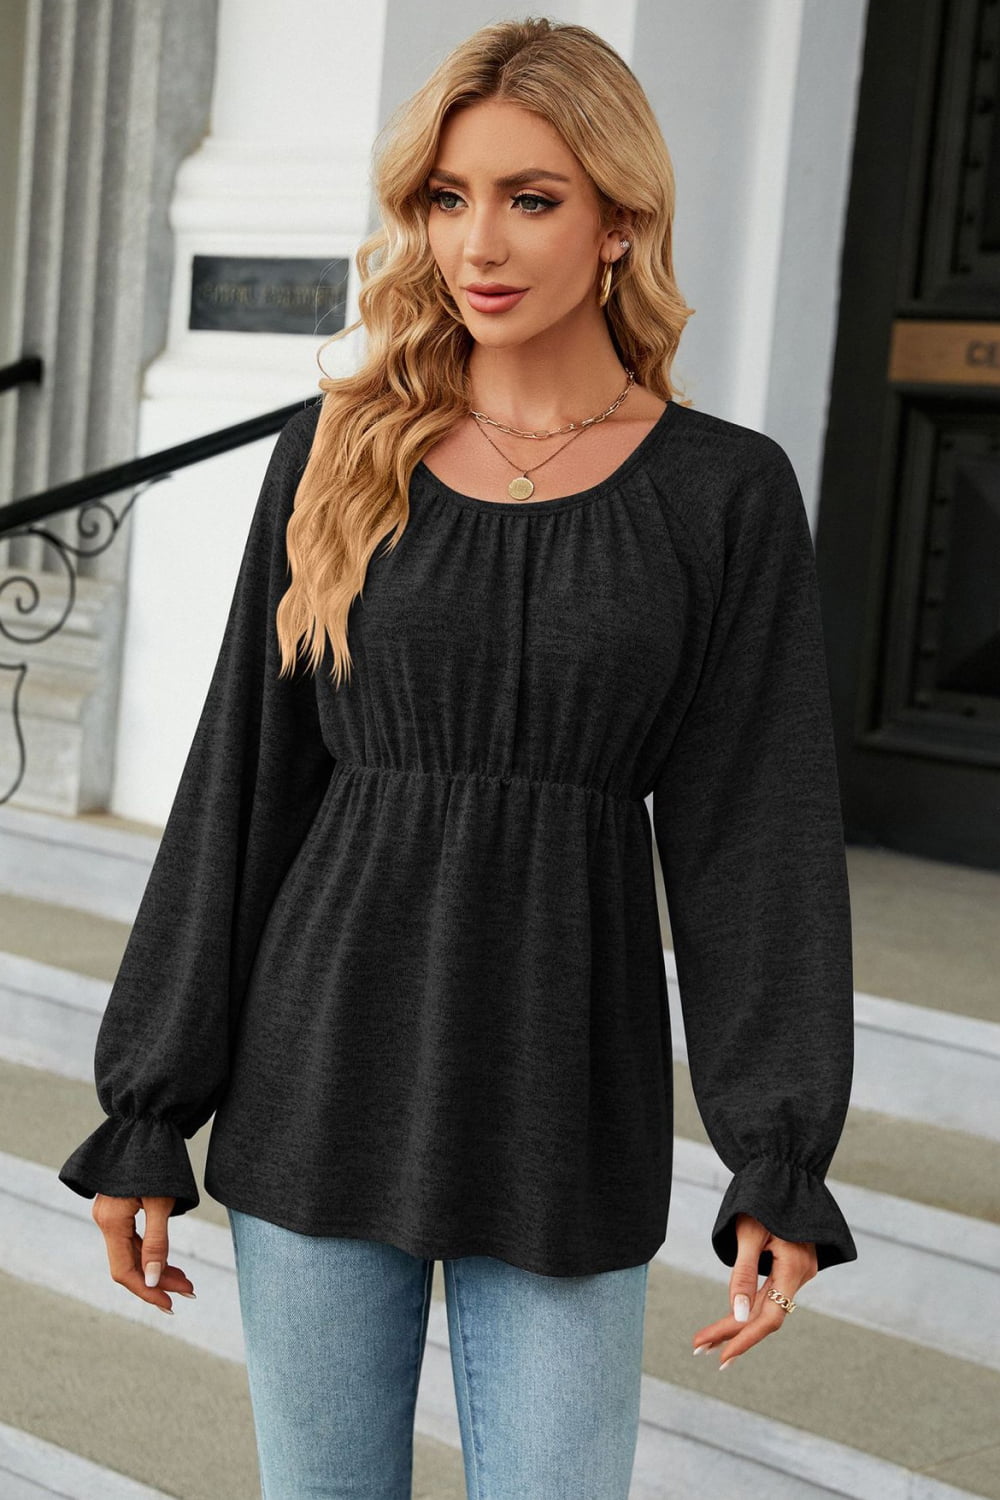 Round Neck Flounce Sleeve Blouse - Women’s Clothing & Accessories - Shirts & Tops - 5 - 2024